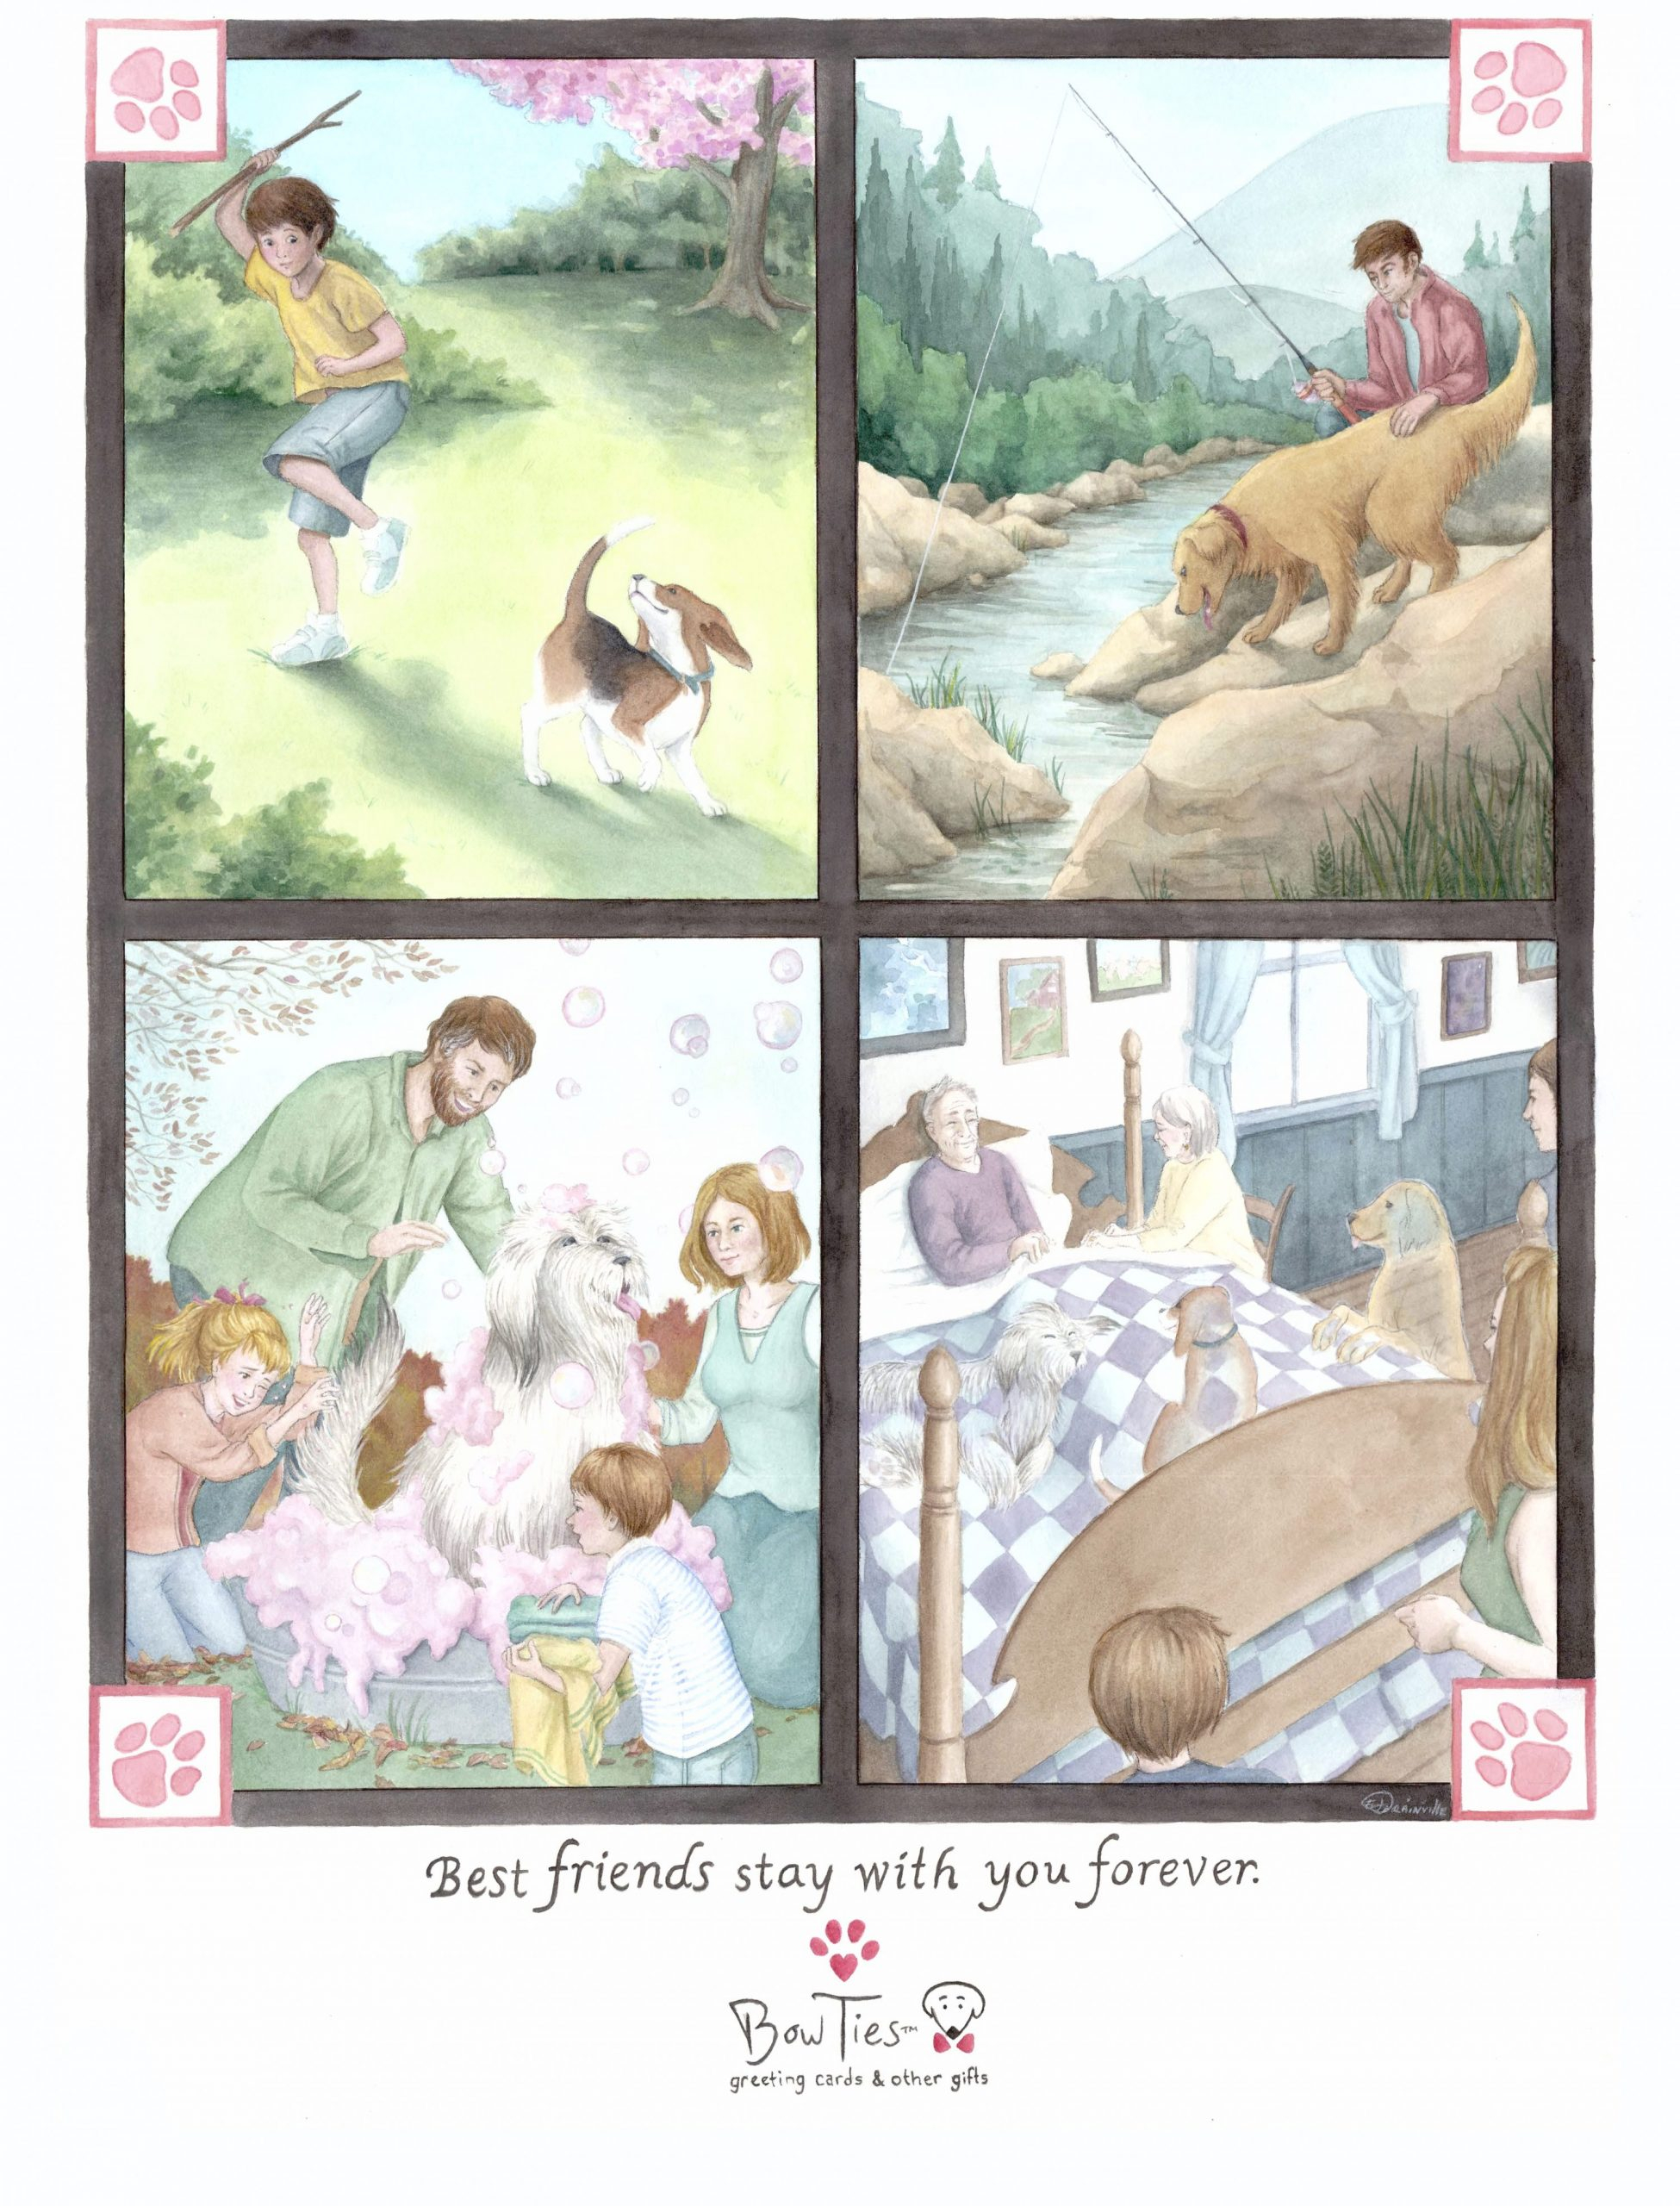 Best Friends Stay With You Forever – print